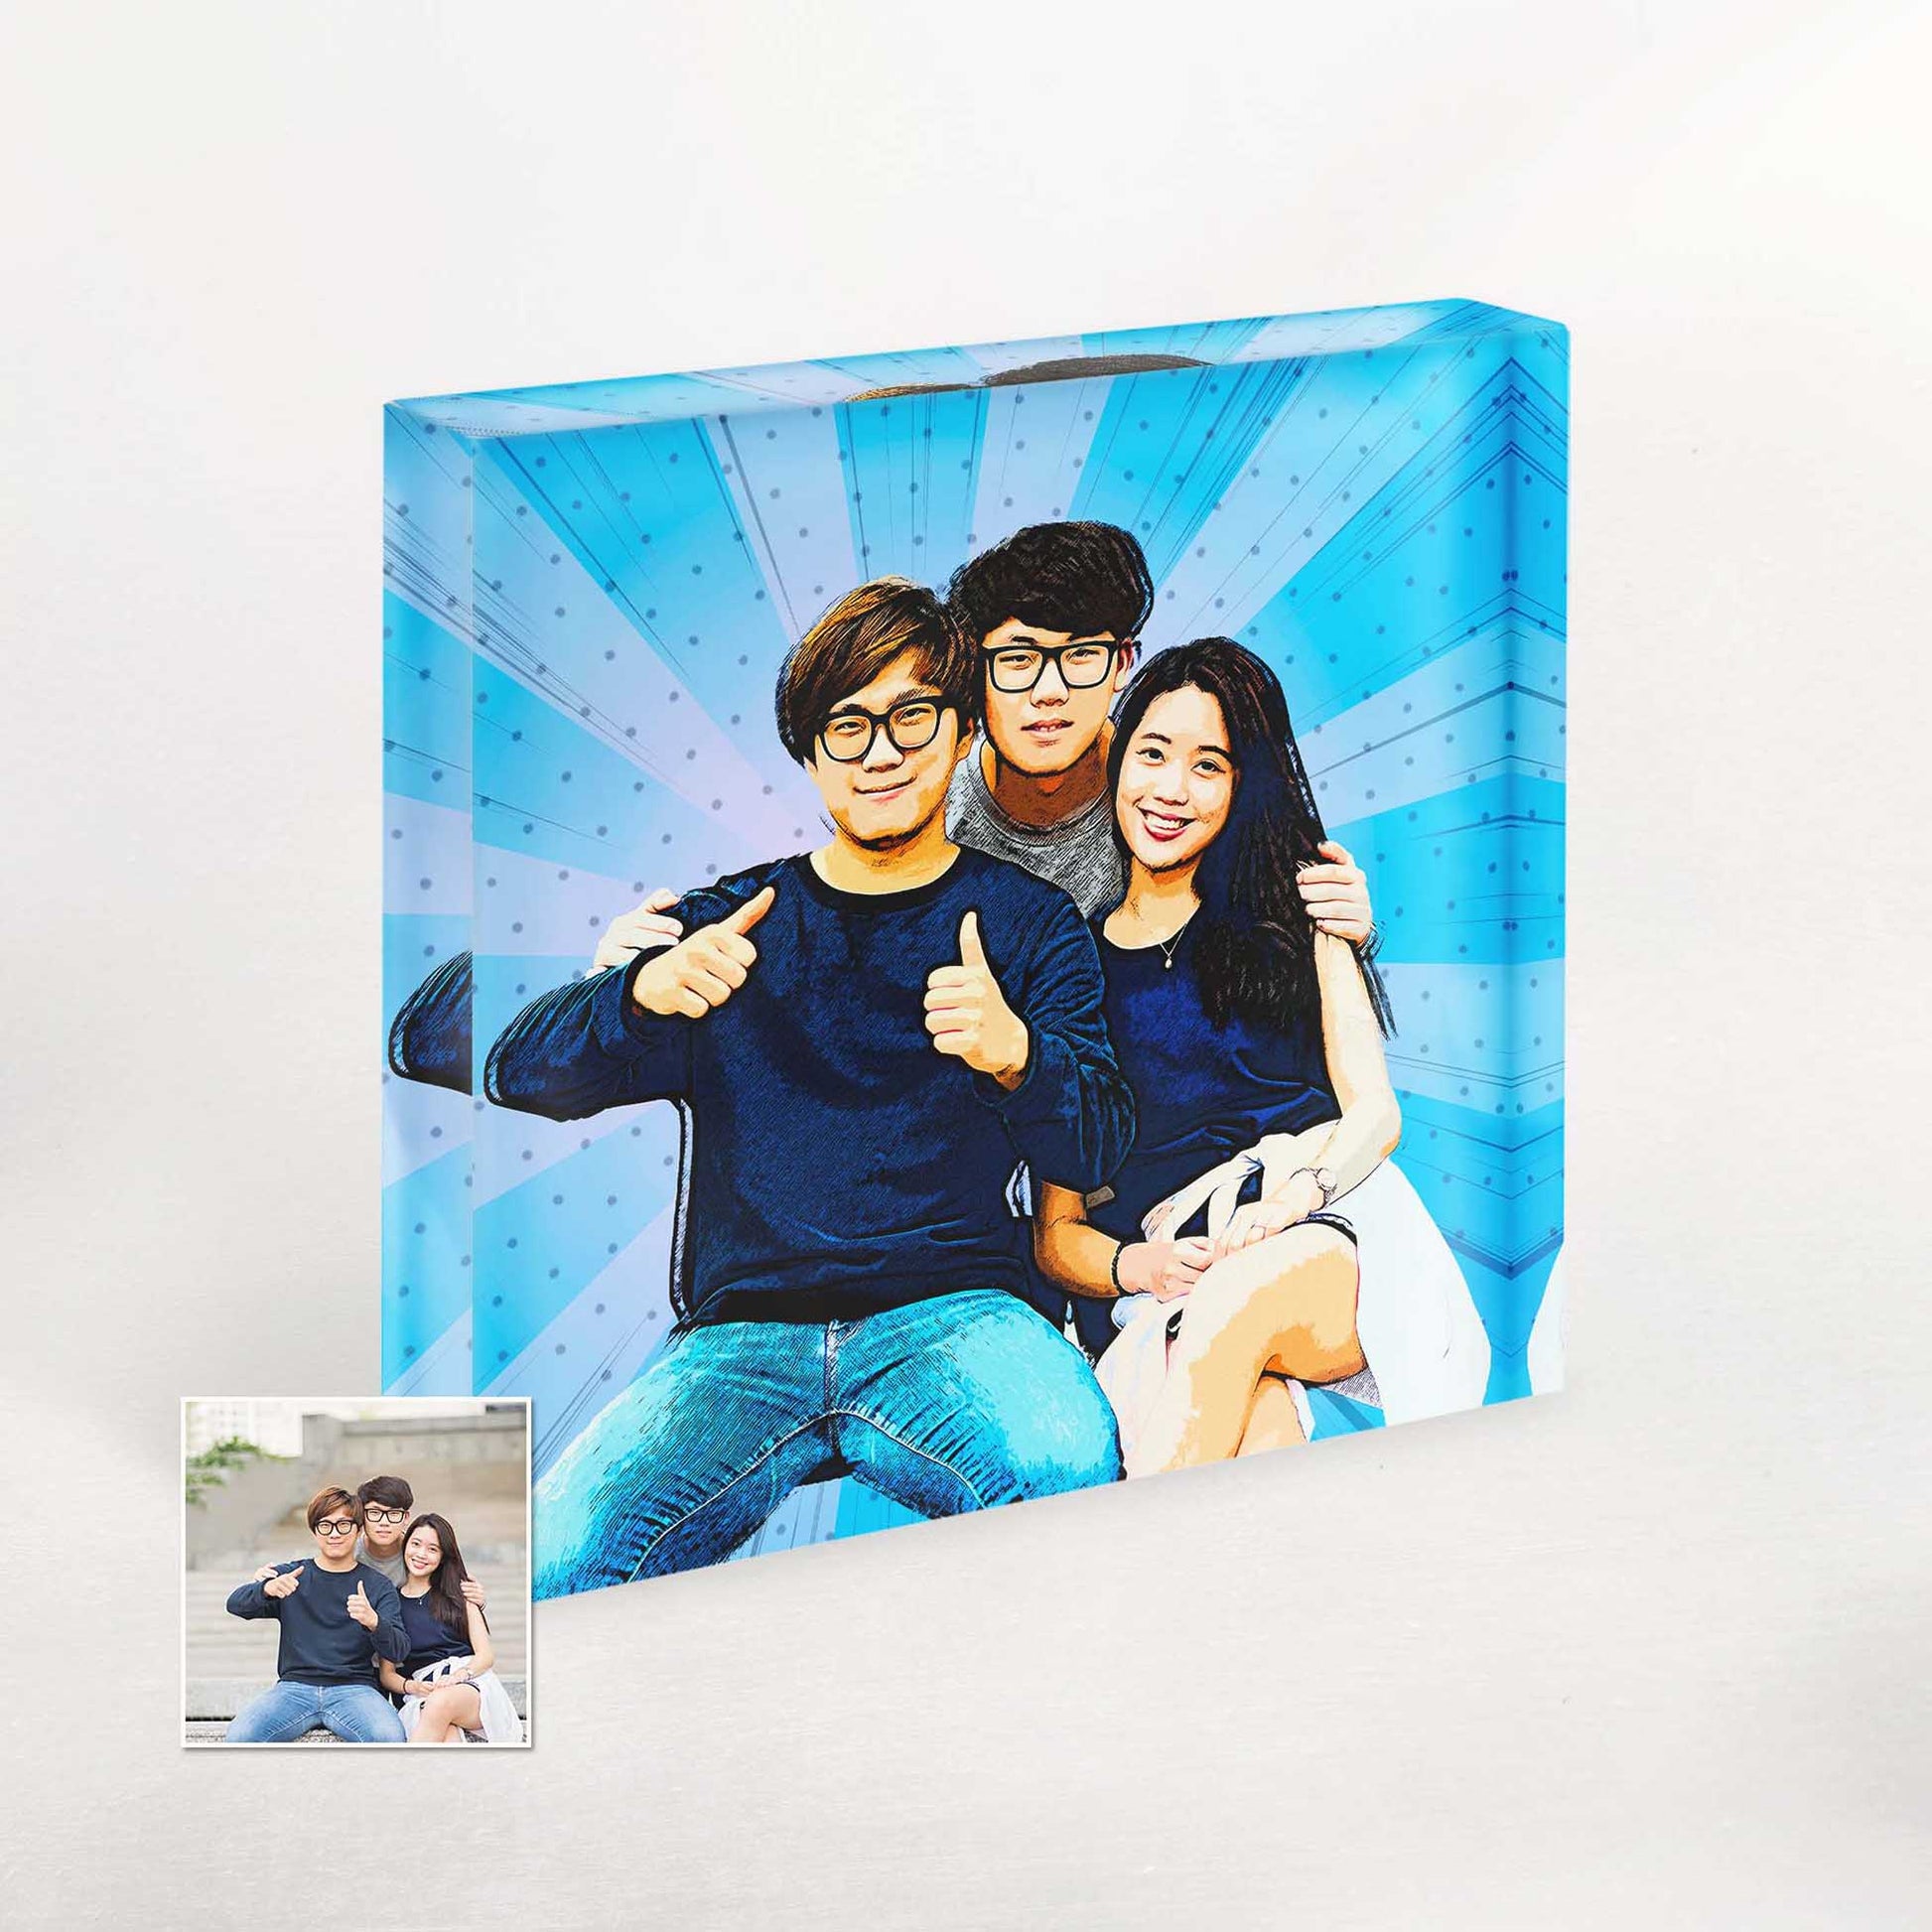 Personalise your space with our Cartoon Comic Acrylic Block Photo. Its fresh and original design adds a touch of fun and happiness to any room, making it a delightful addition to your home decor.